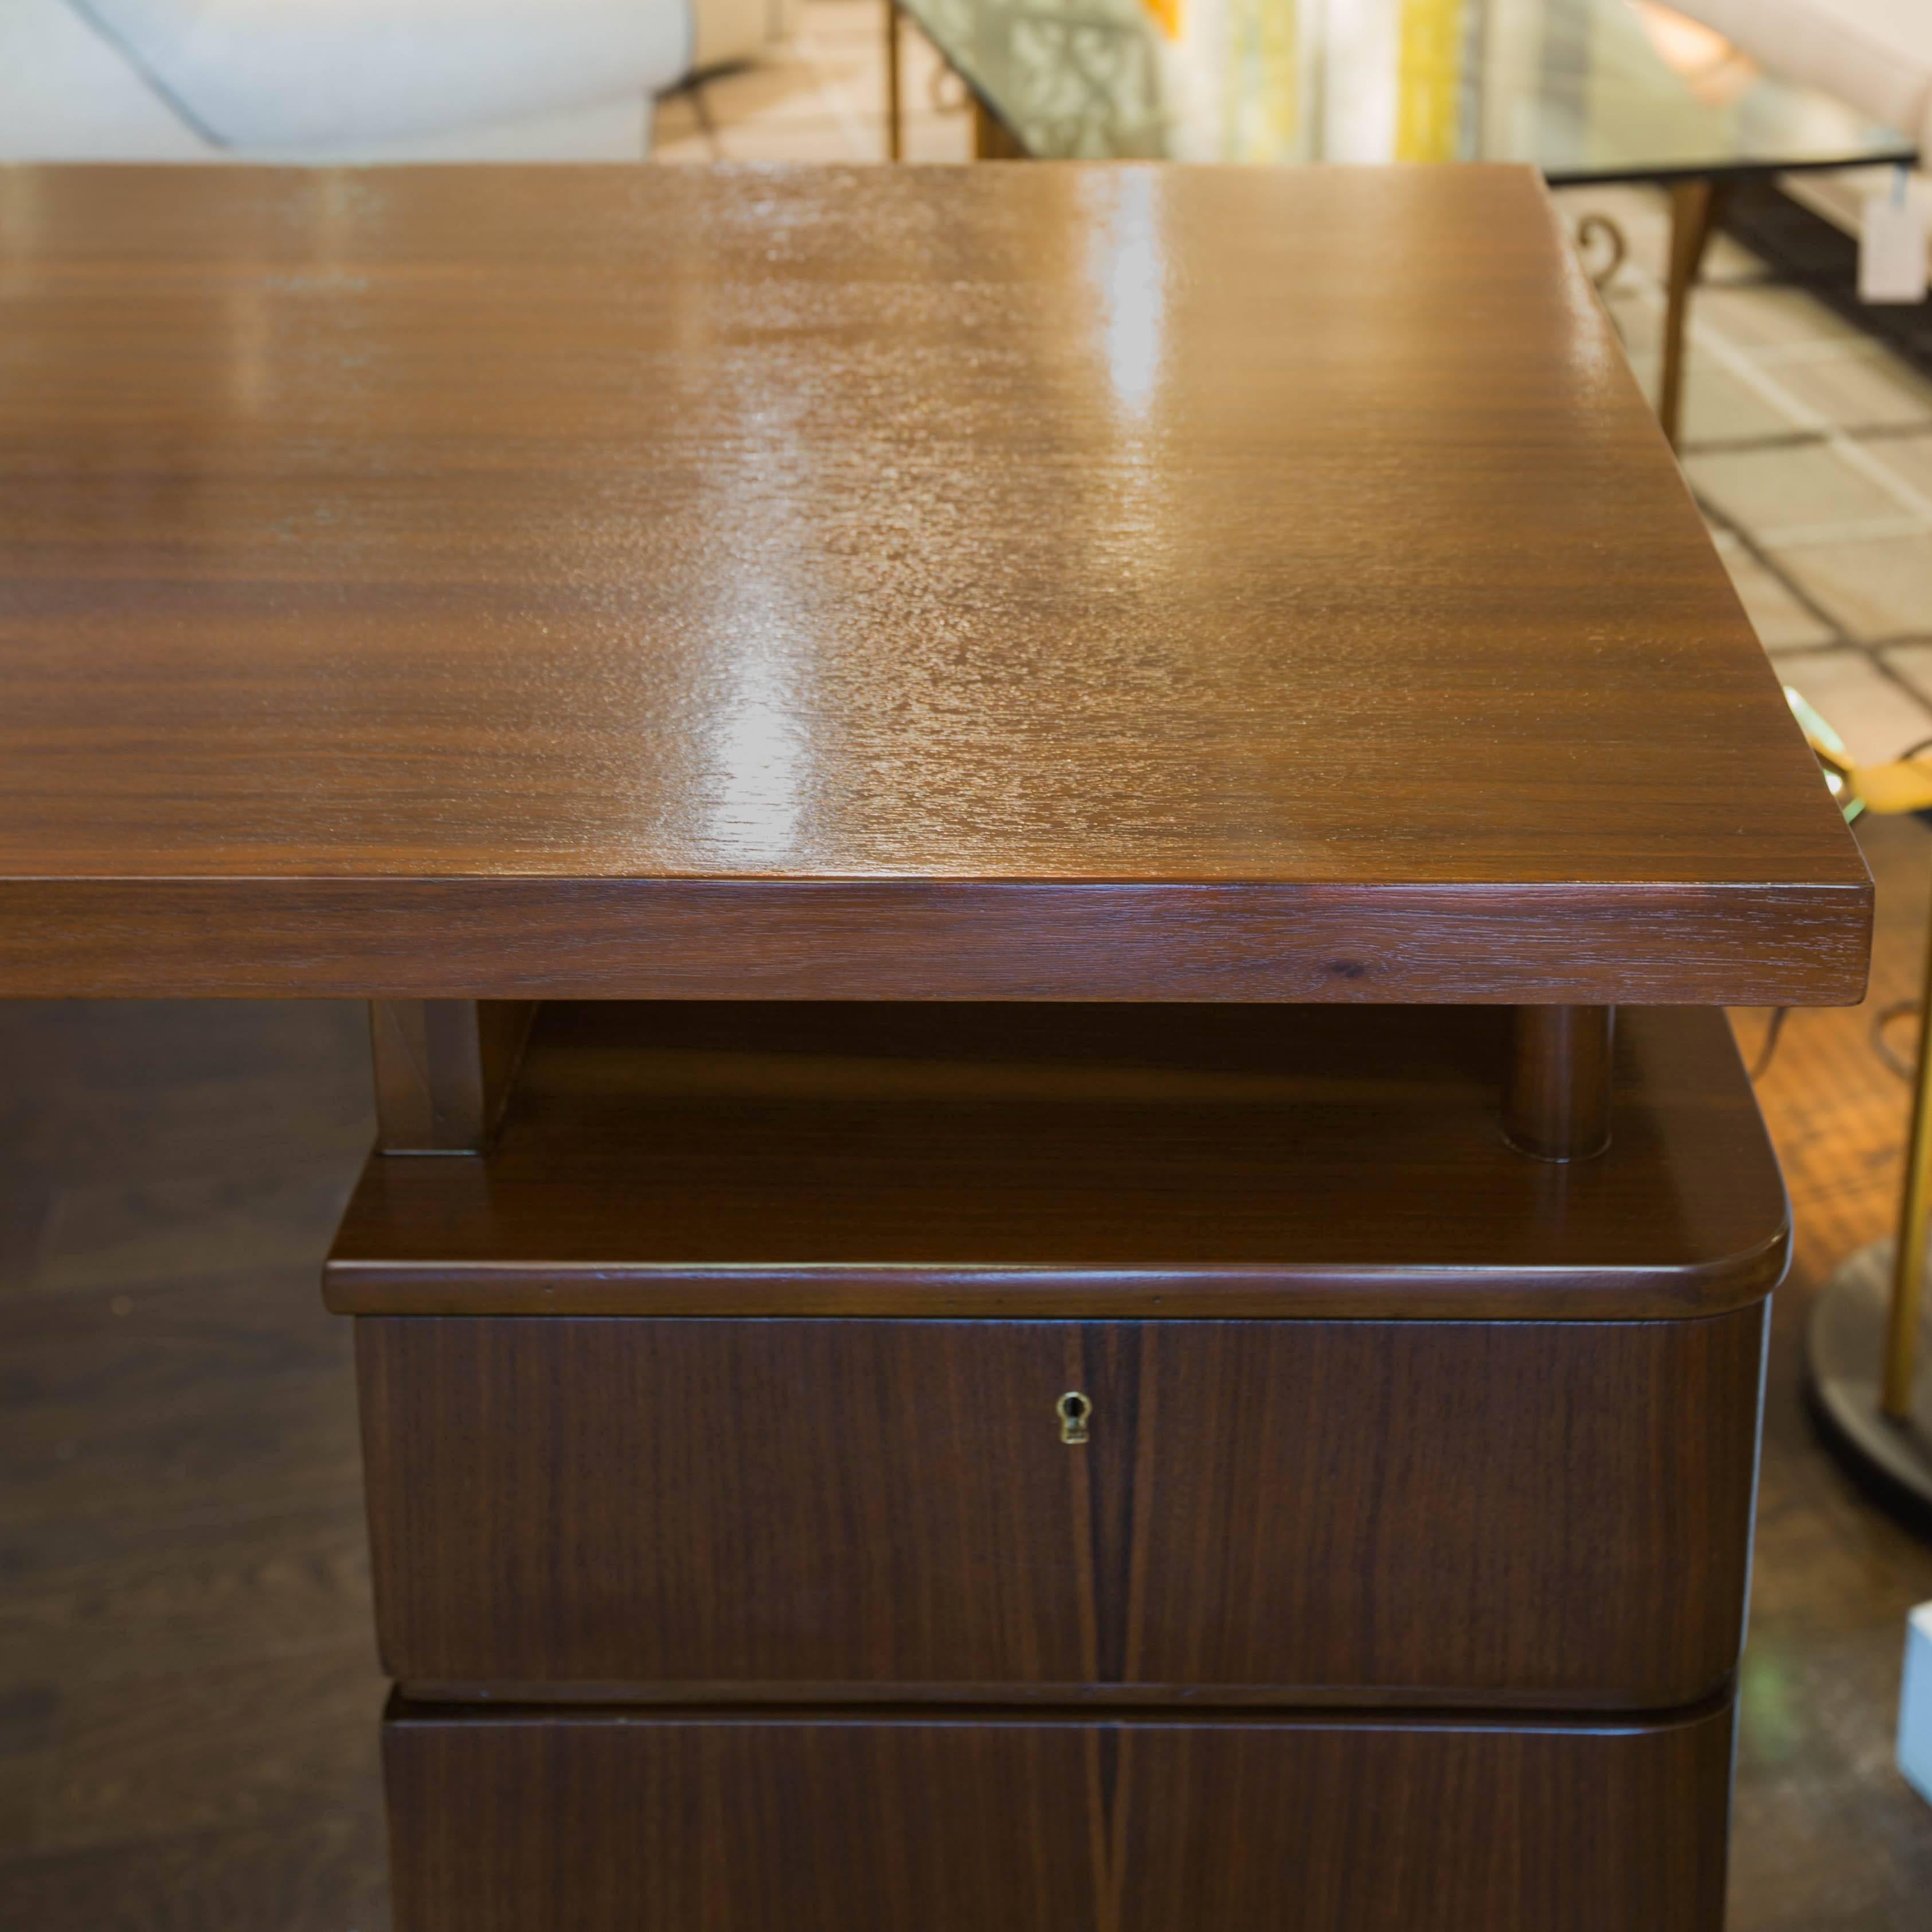 Machine Age design walnut desk with 3 drawers (top one locks with key) and a floating top. Newly refinished.